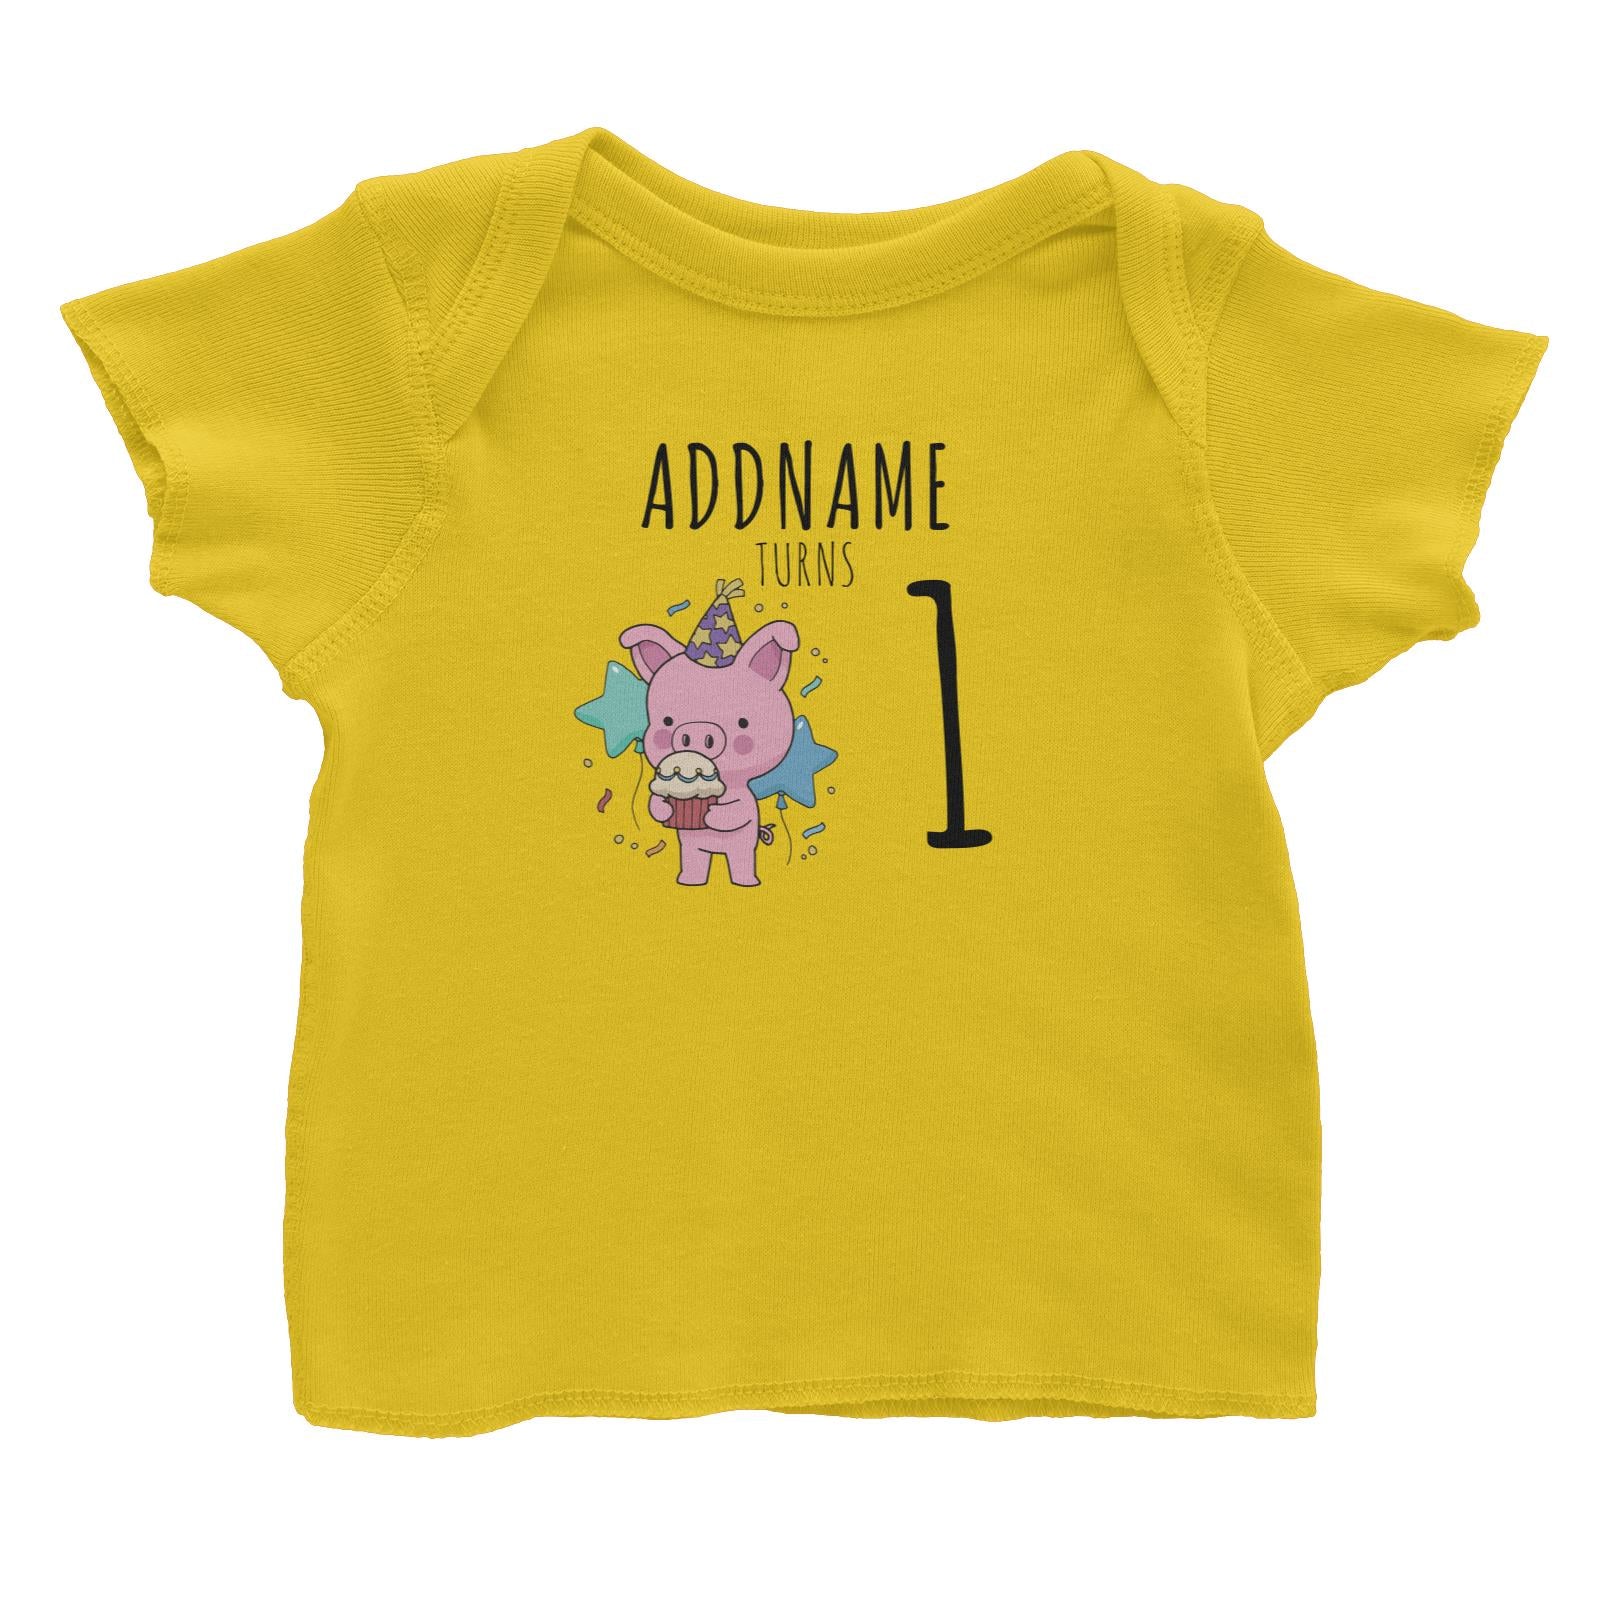 Birthday Sketch Animals Pig with Party Hat Eating Cupcake Addname Turns 1 Baby T-Shirt